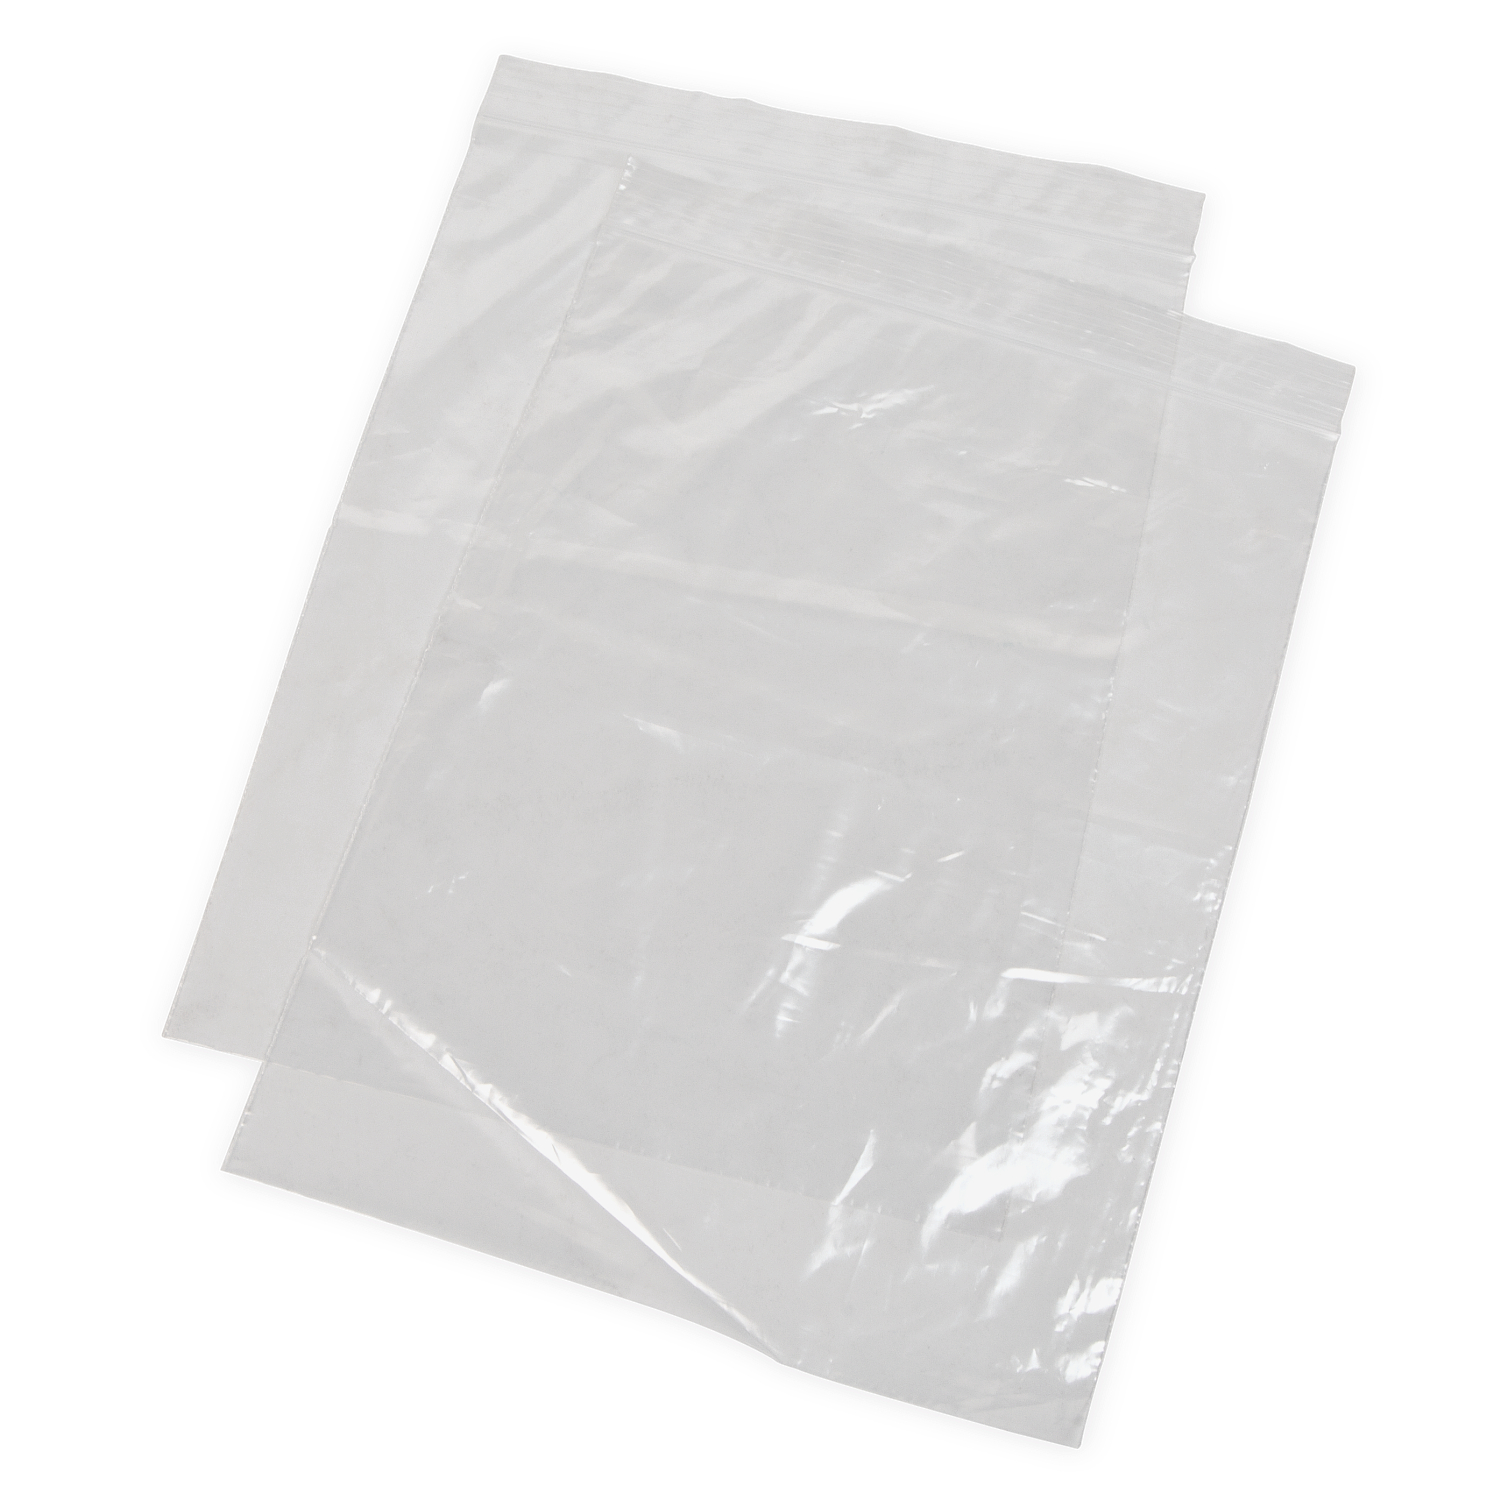 Gaylord Archival® 13 x 18 Reclosable Polyethylene Bags (4-Pack), Kits, Photo, Print & Art Preservation, Preservation